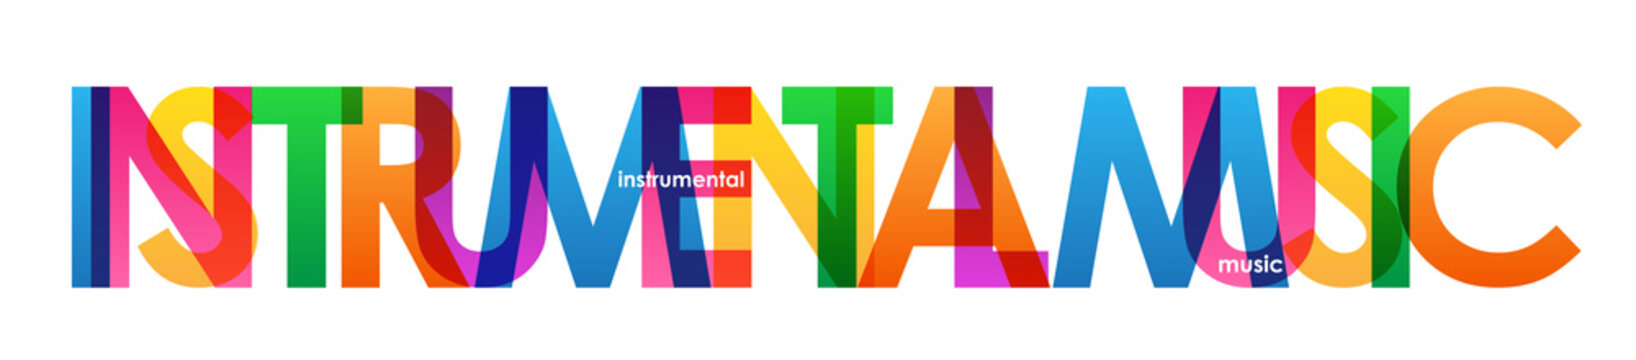 INSTRUMENTAL MUSIC colorful letters banner